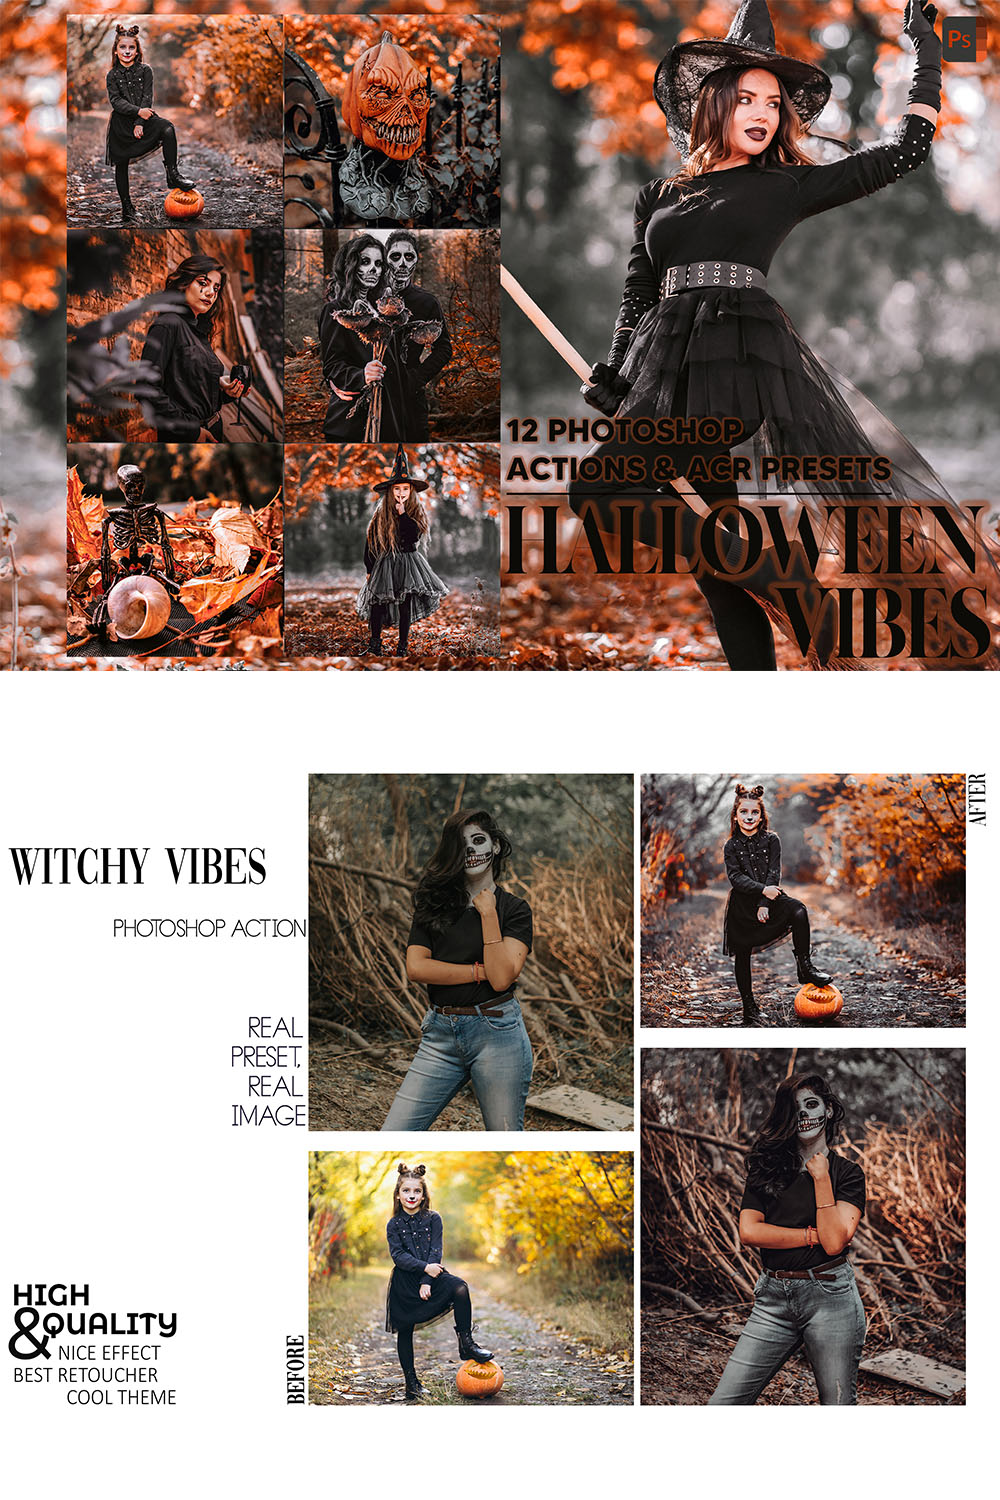 12 Photoshop Actions, Halloween Vibes Ps Action, Autumn Moody ACR Preset, Horror Ps Filter, Atn Portrait Lifestyle Theme Instagram Blogger pinterest preview image.